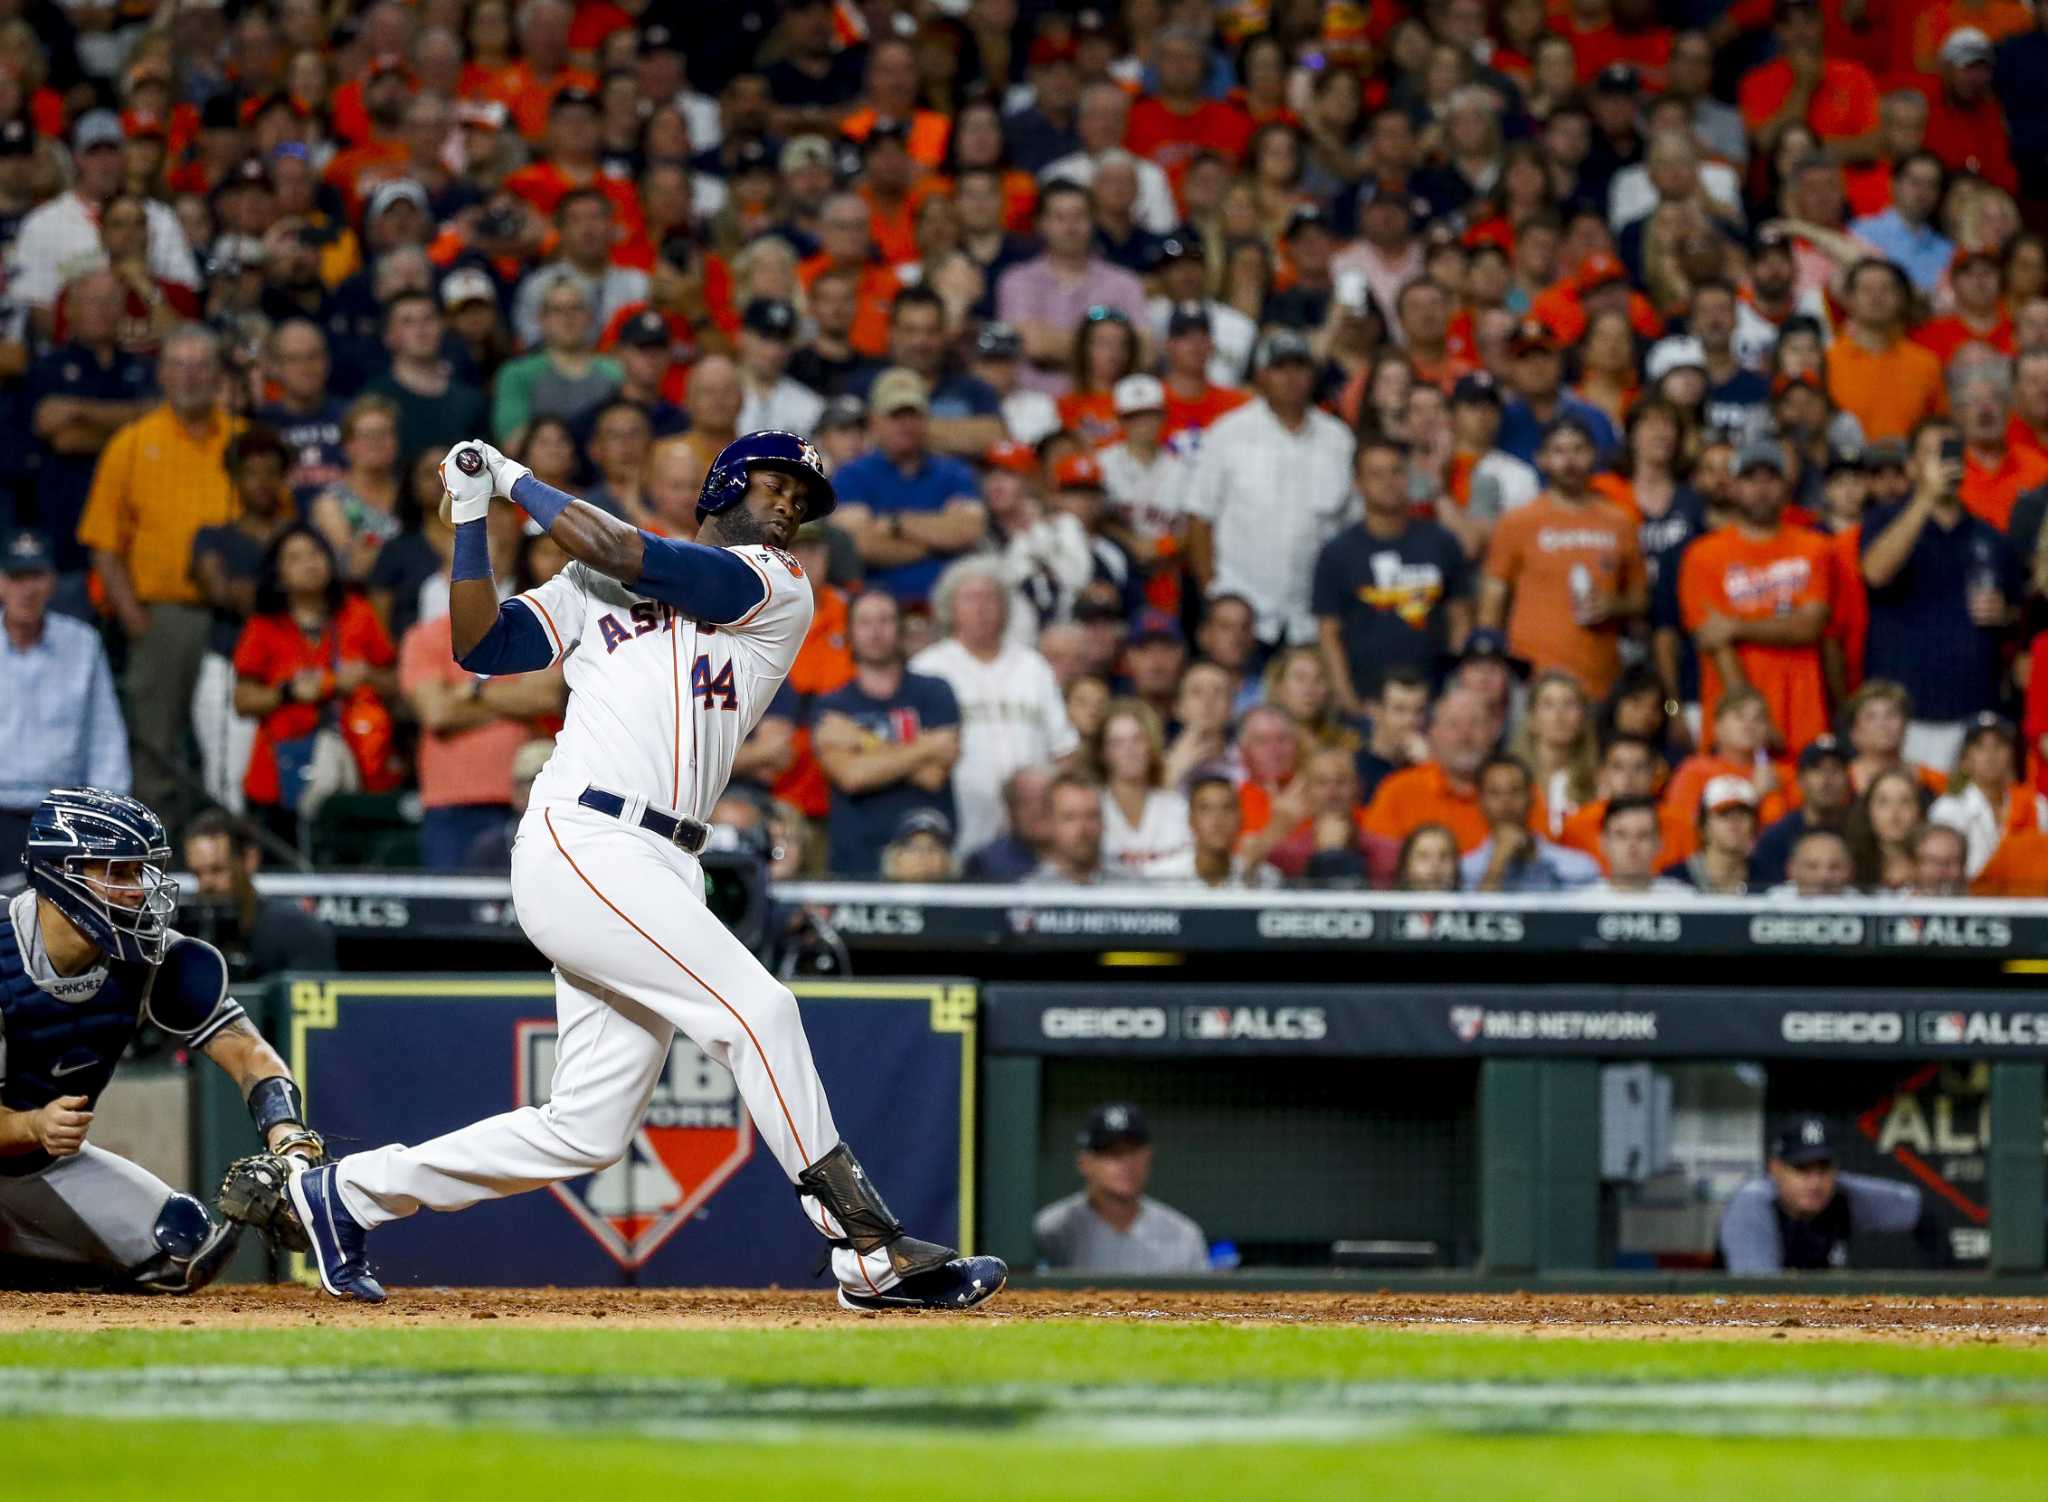 For Yordan Alvarez, it just takes one swing to make a difference